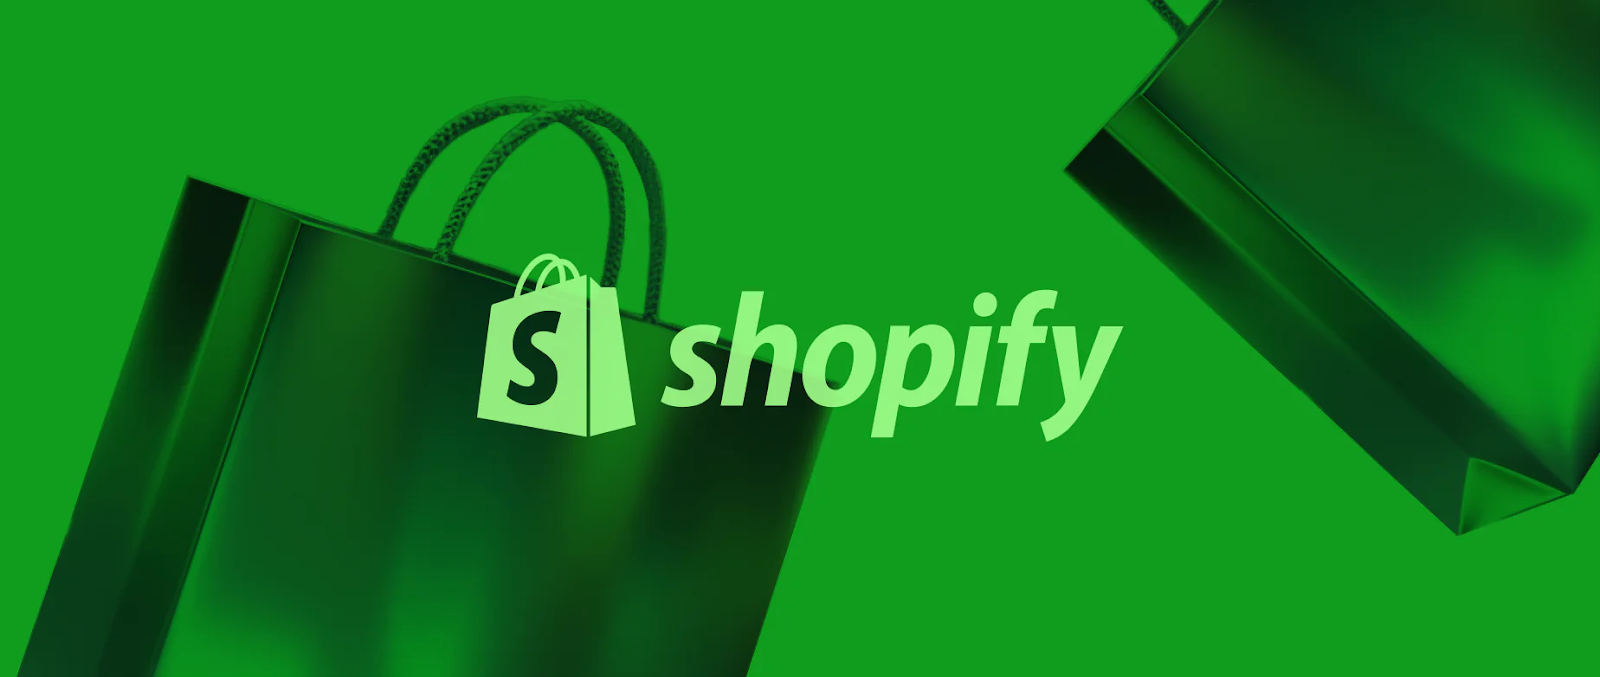 What are shopify Ads?